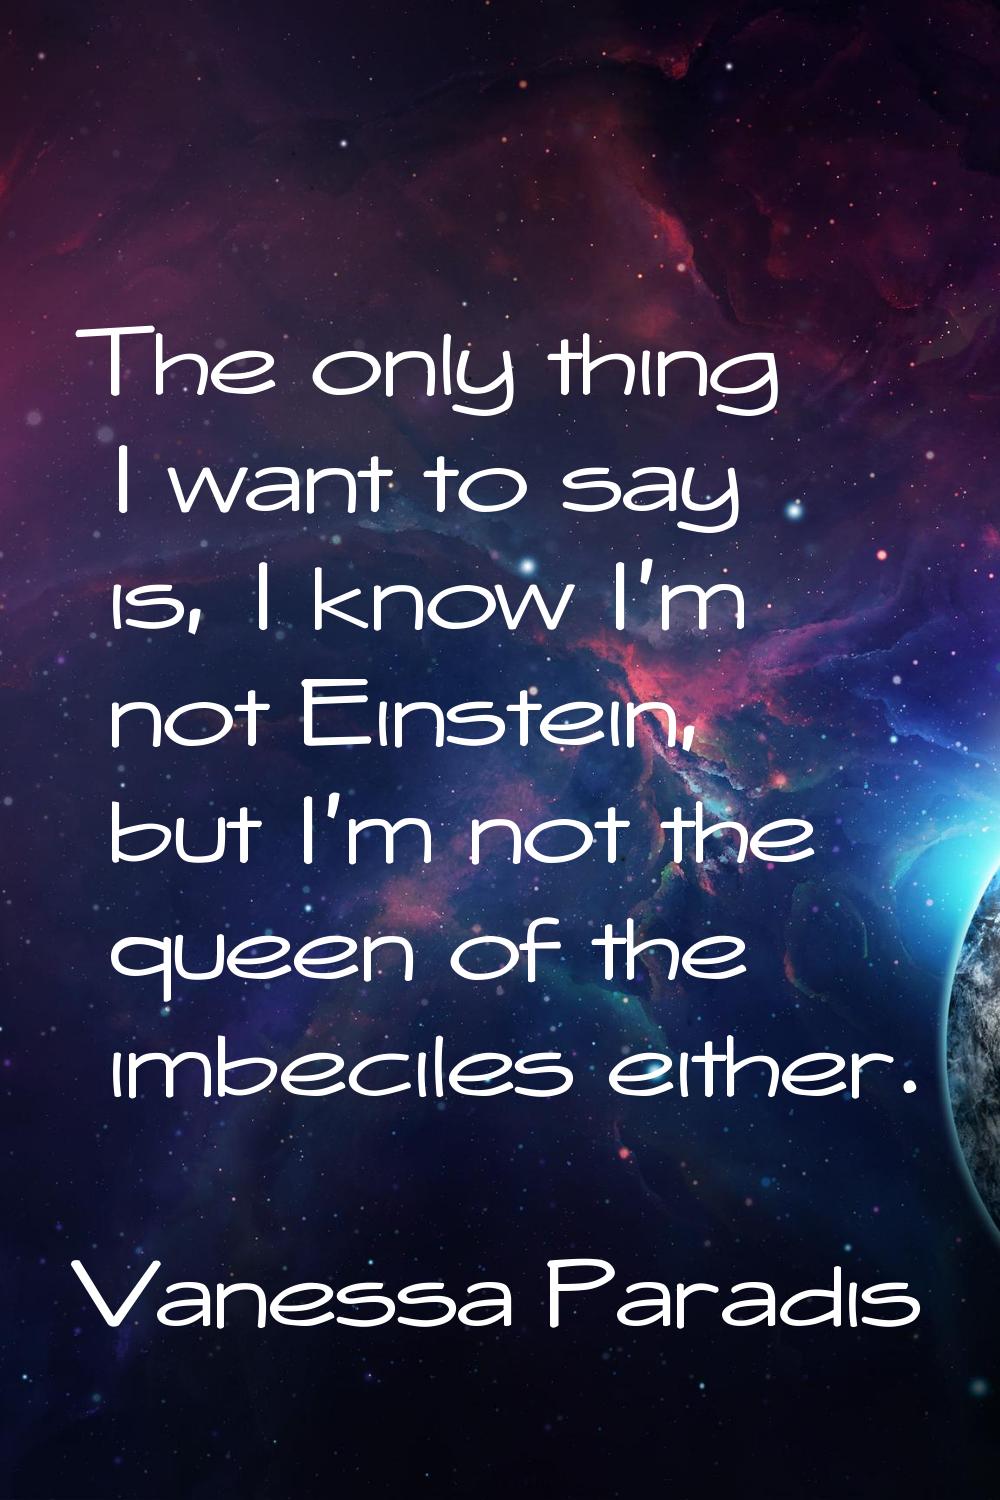 The only thing I want to say is, I know I'm not Einstein, but I'm not the queen of the imbeciles ei